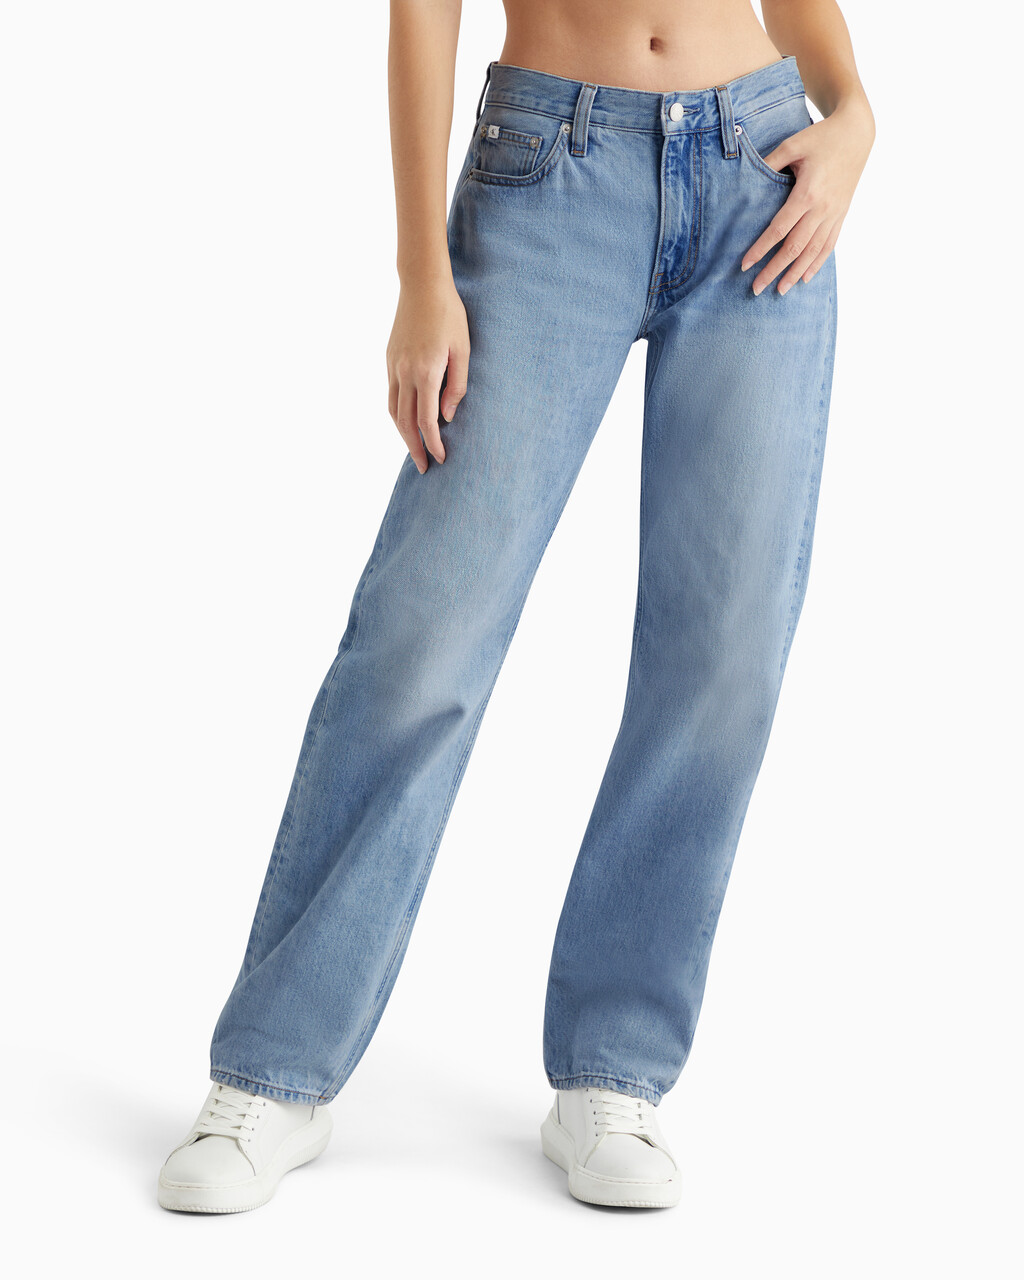 Sustainable Low Rise Straight Jeans, 008A POWDER BLU, hi-res